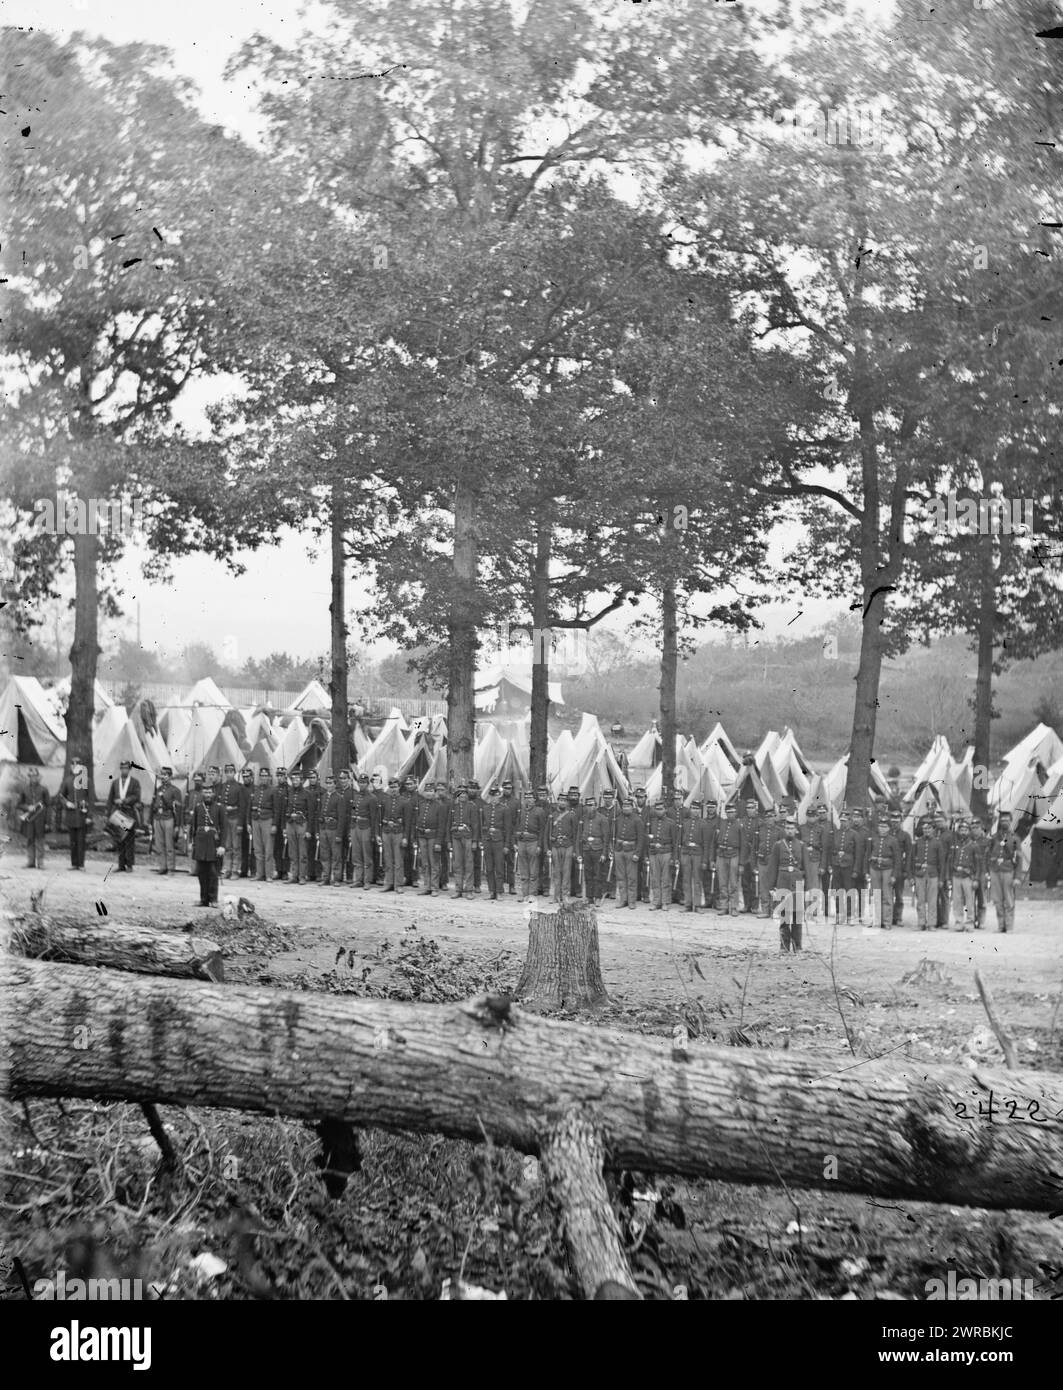 Camp of 35th New York Volunteers. (Jefferson County Regiment), between 1861 and 1869, United States, History, Civil War, 1861-1865, Glass negatives, 1860-1870., Stereographs, 1860-1870, Glass negatives, 1860-1870, 1 negative (2 plates): glass, stereograph, wet collodion Stock Photo